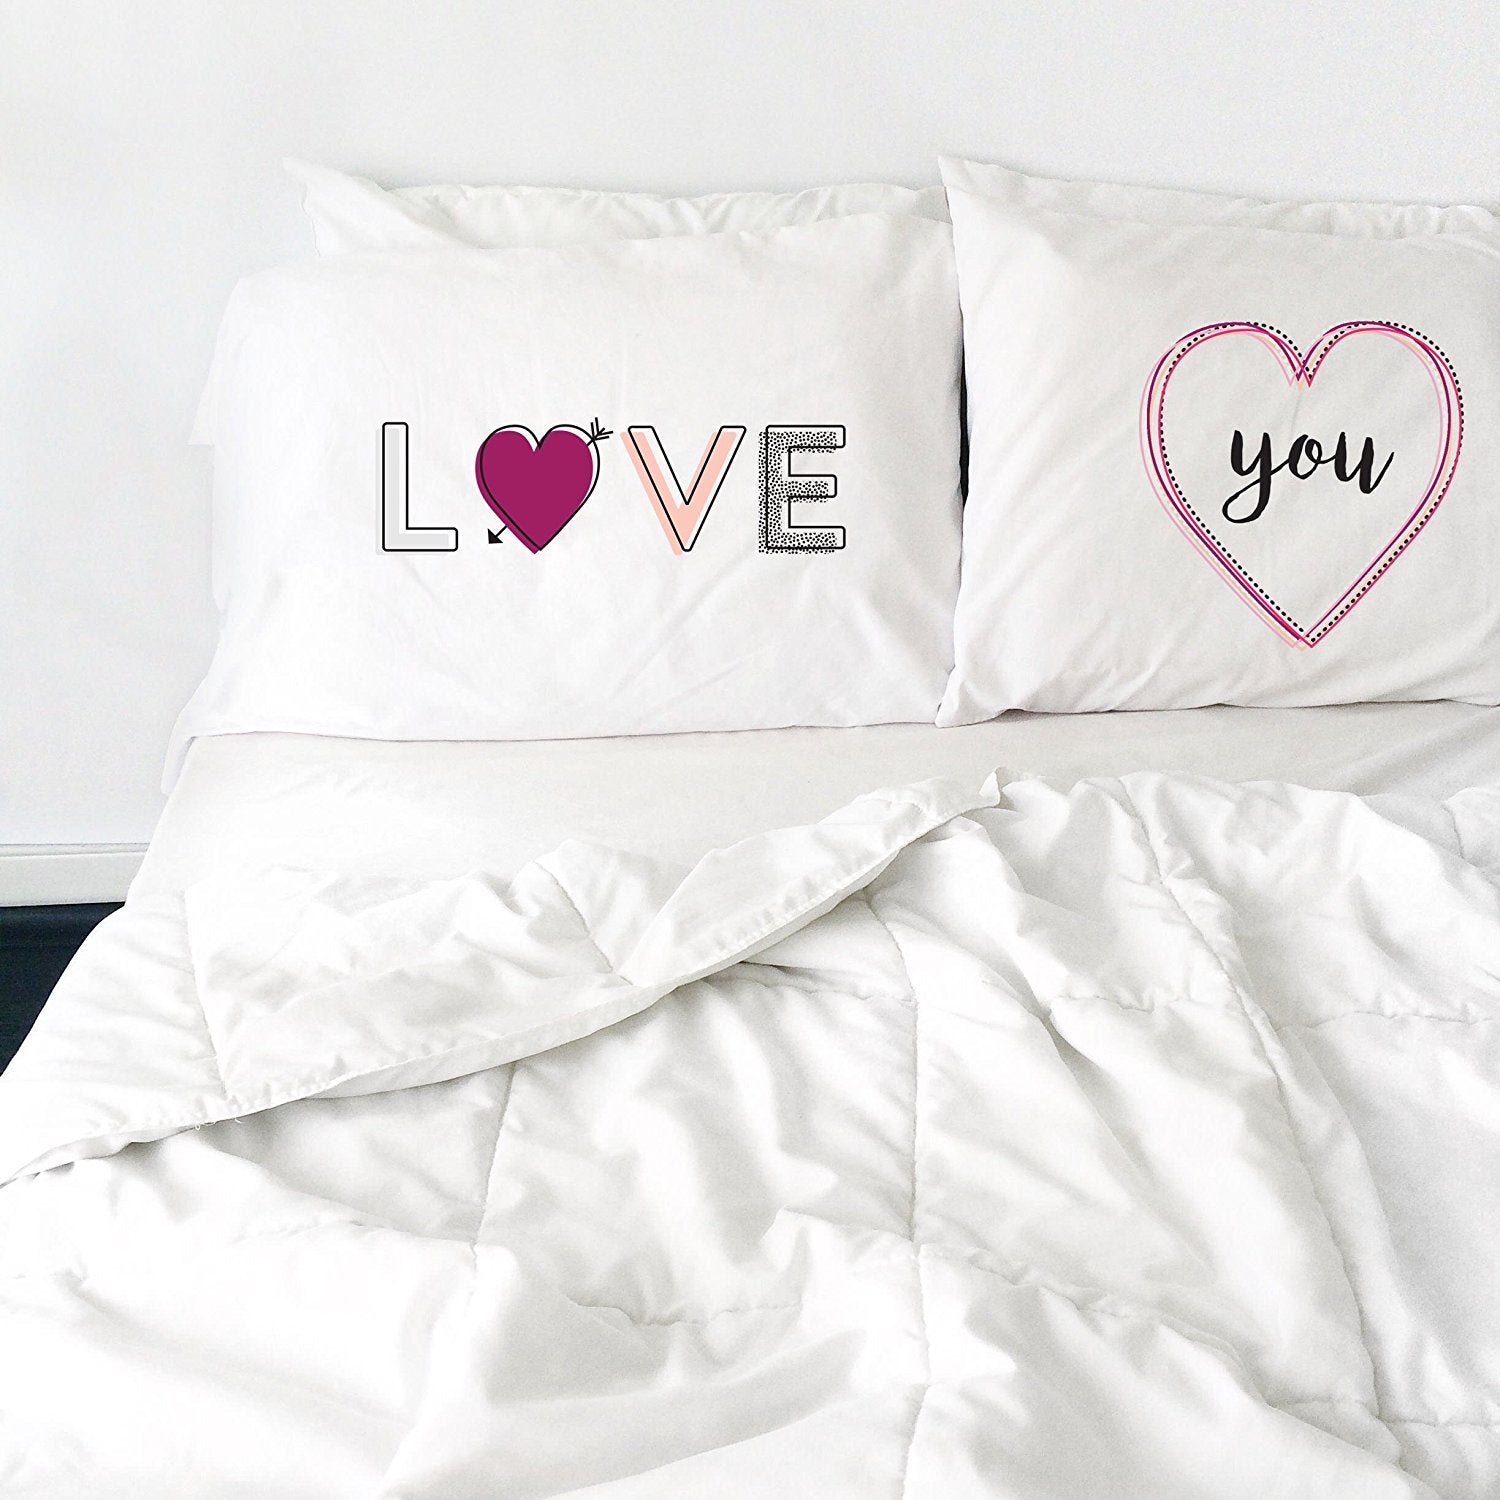 LOVE You Pillowcase Set (Two 20x30 Standard Pillow Case) Couples Gifts For Her - Wedding Decoration - Anniversary Gift Birthday Present Engagements